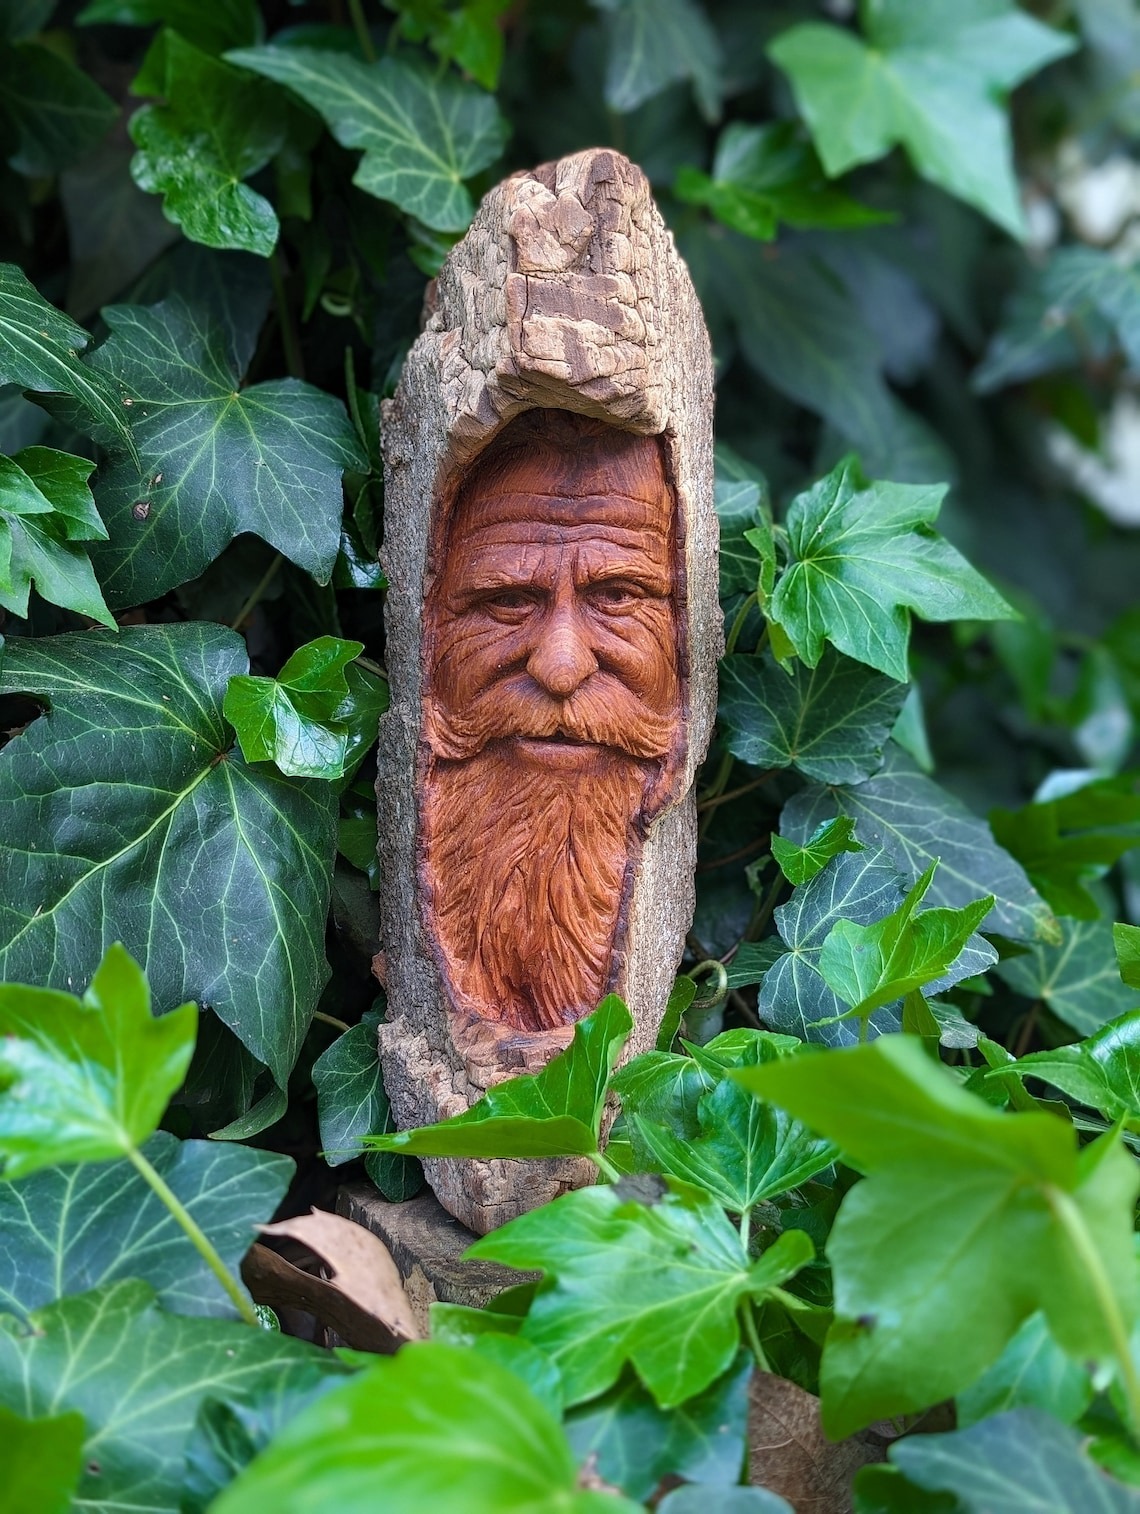 Where Wood Whispers, The Remarkable Sculptures Of Tom Wilkinson (3)